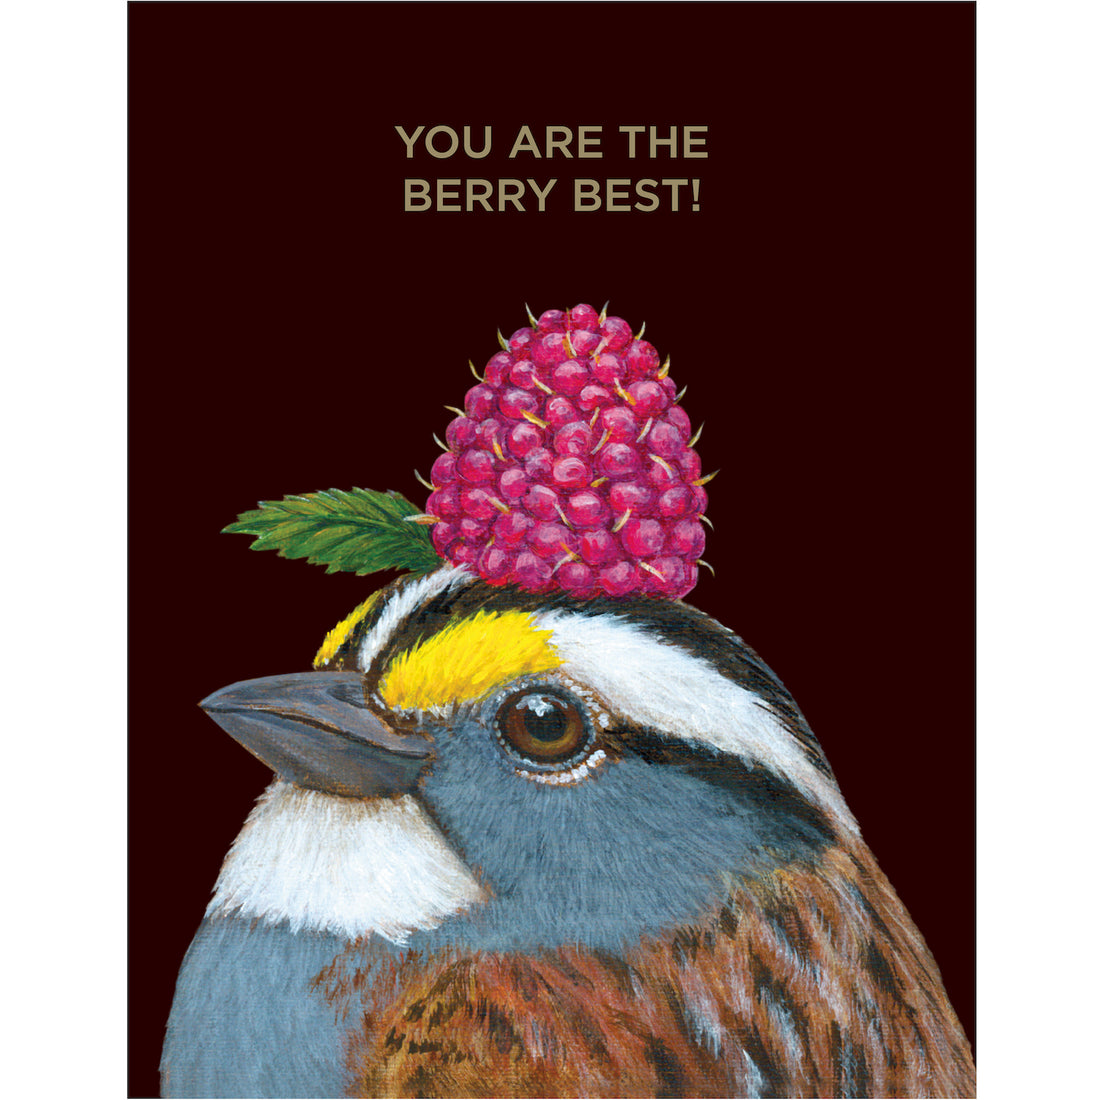 You are the Berry Best Bird Card artist greeting card by Hester &amp; Cook.